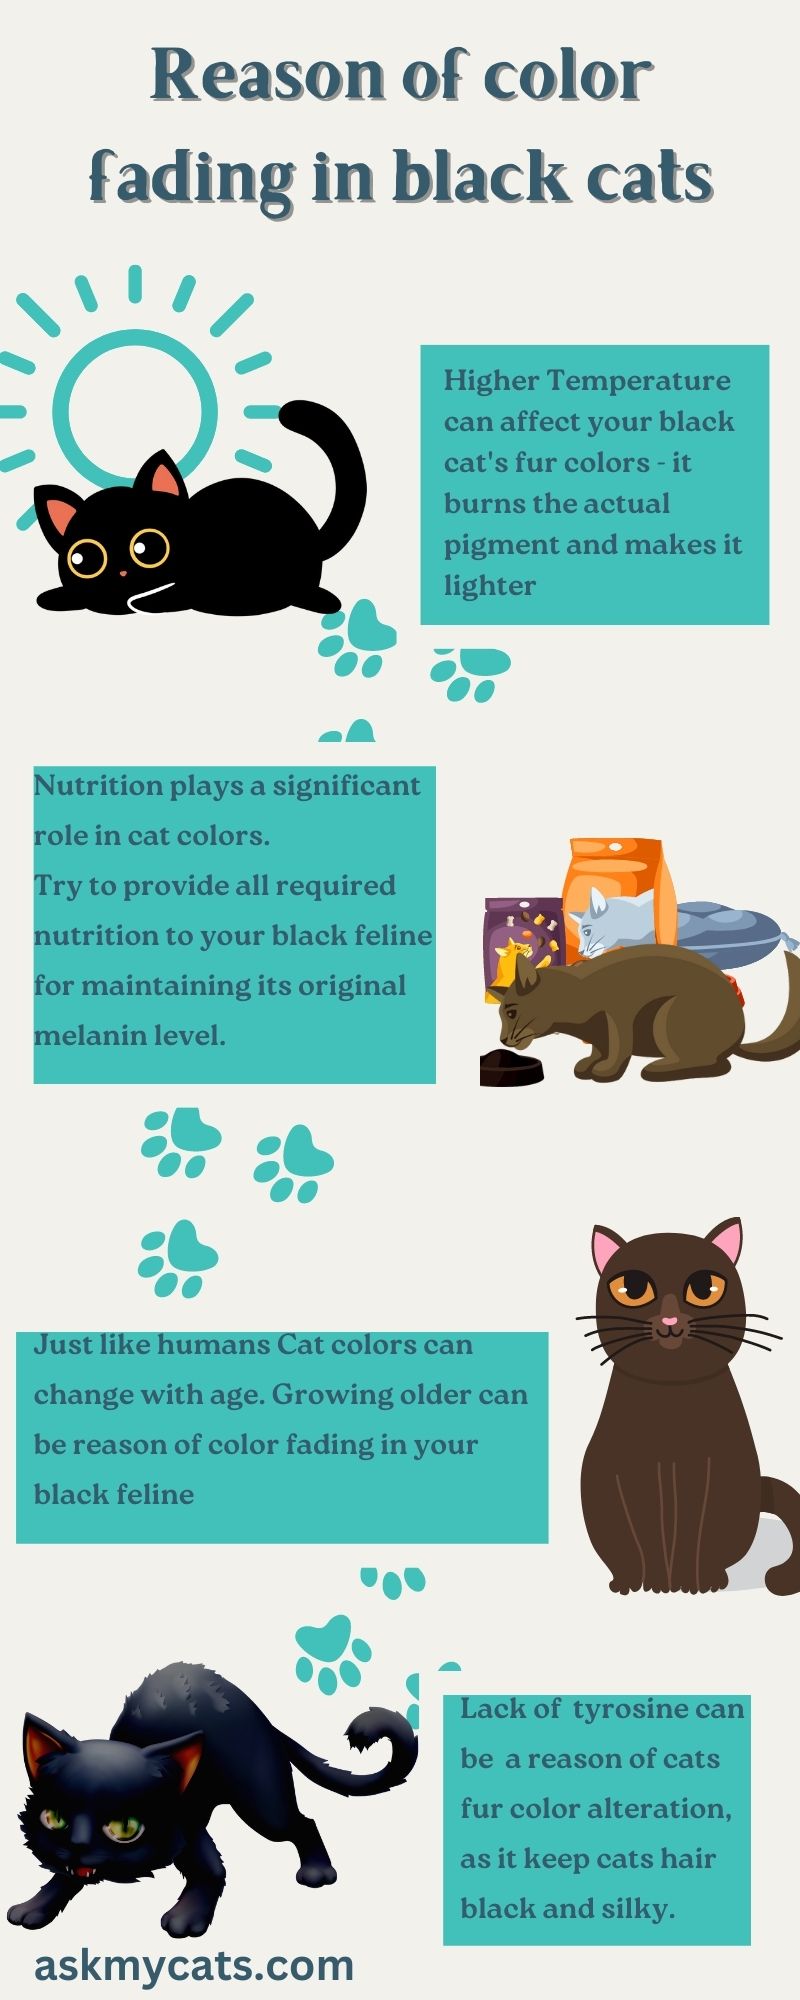 Reason of color fading in black cats (Infographic)